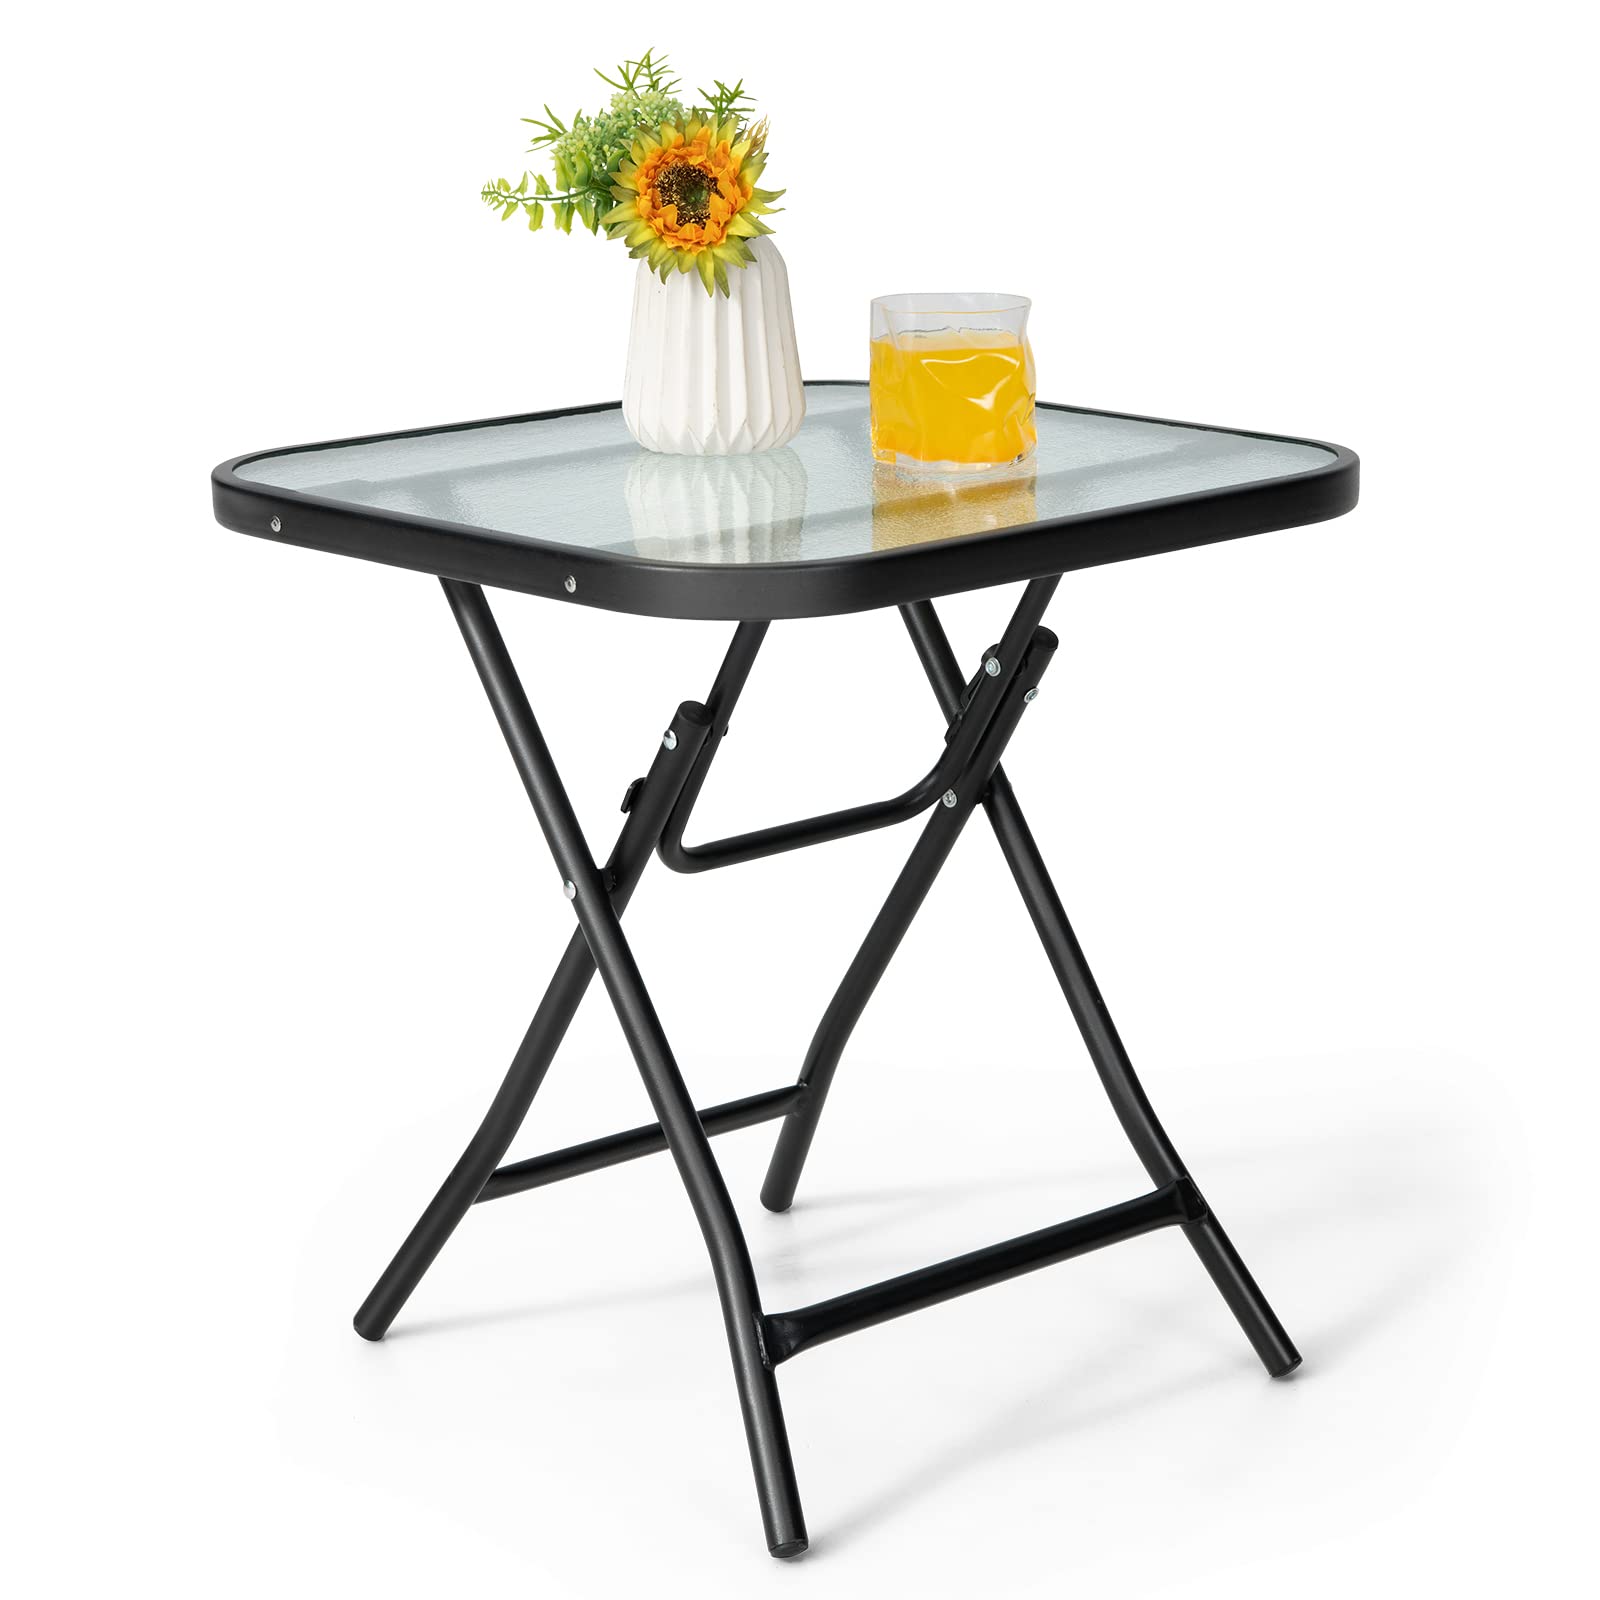 Giantex Folding Side Table, Square Small Patio Table